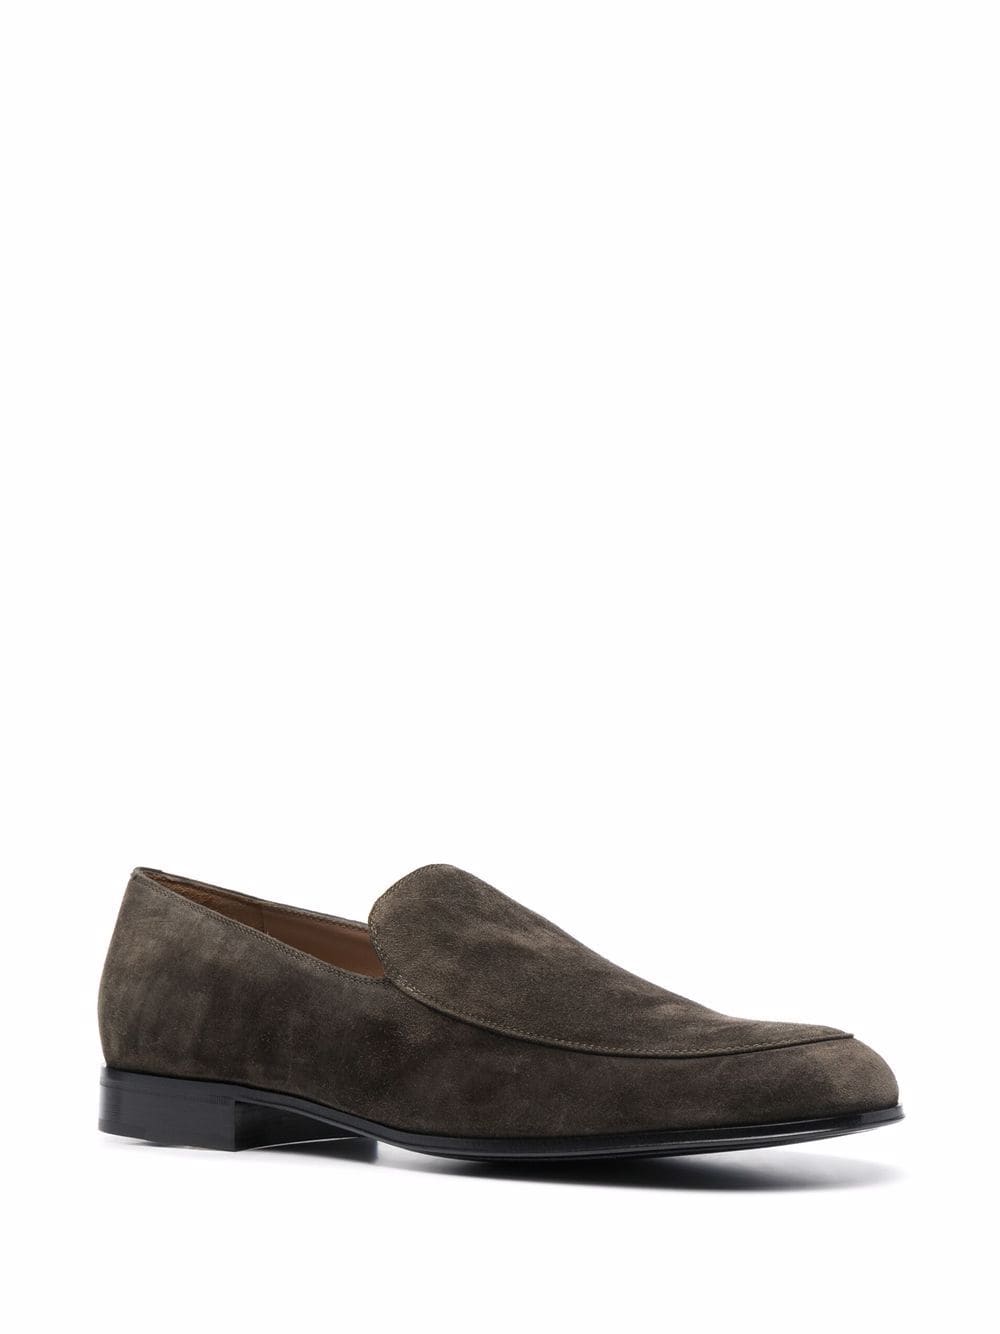 Image 2 of Gianvito Rossi Marcello suede loafers